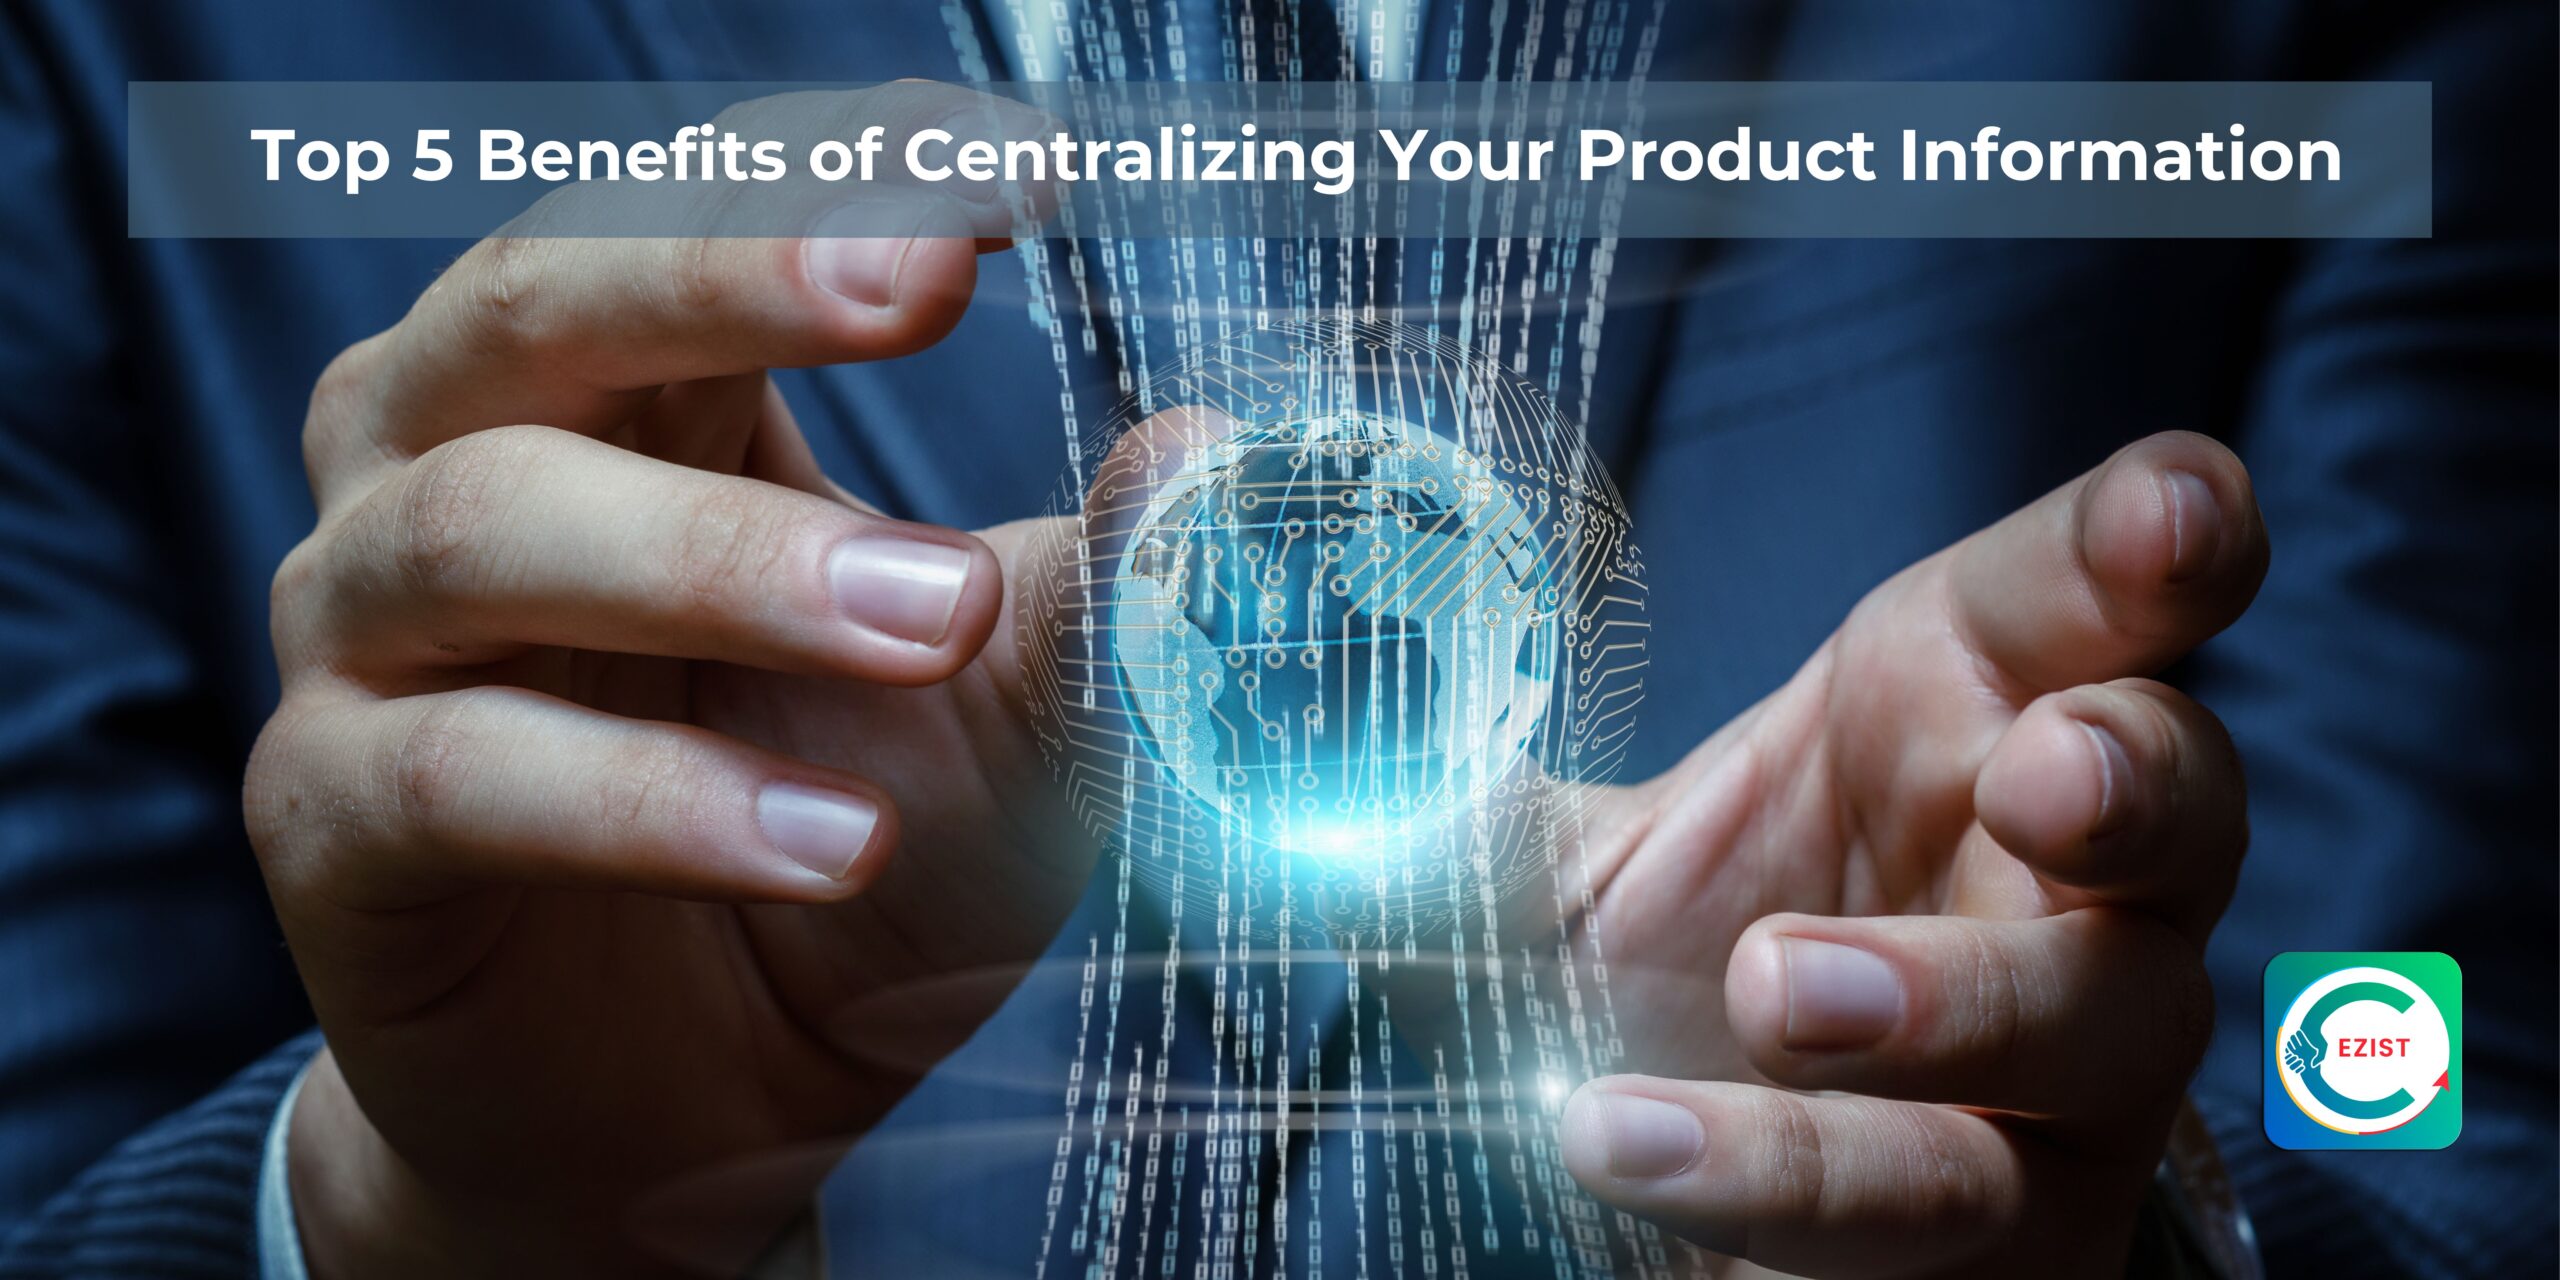 Top 5 Benefits of Centralizing Your Product Information